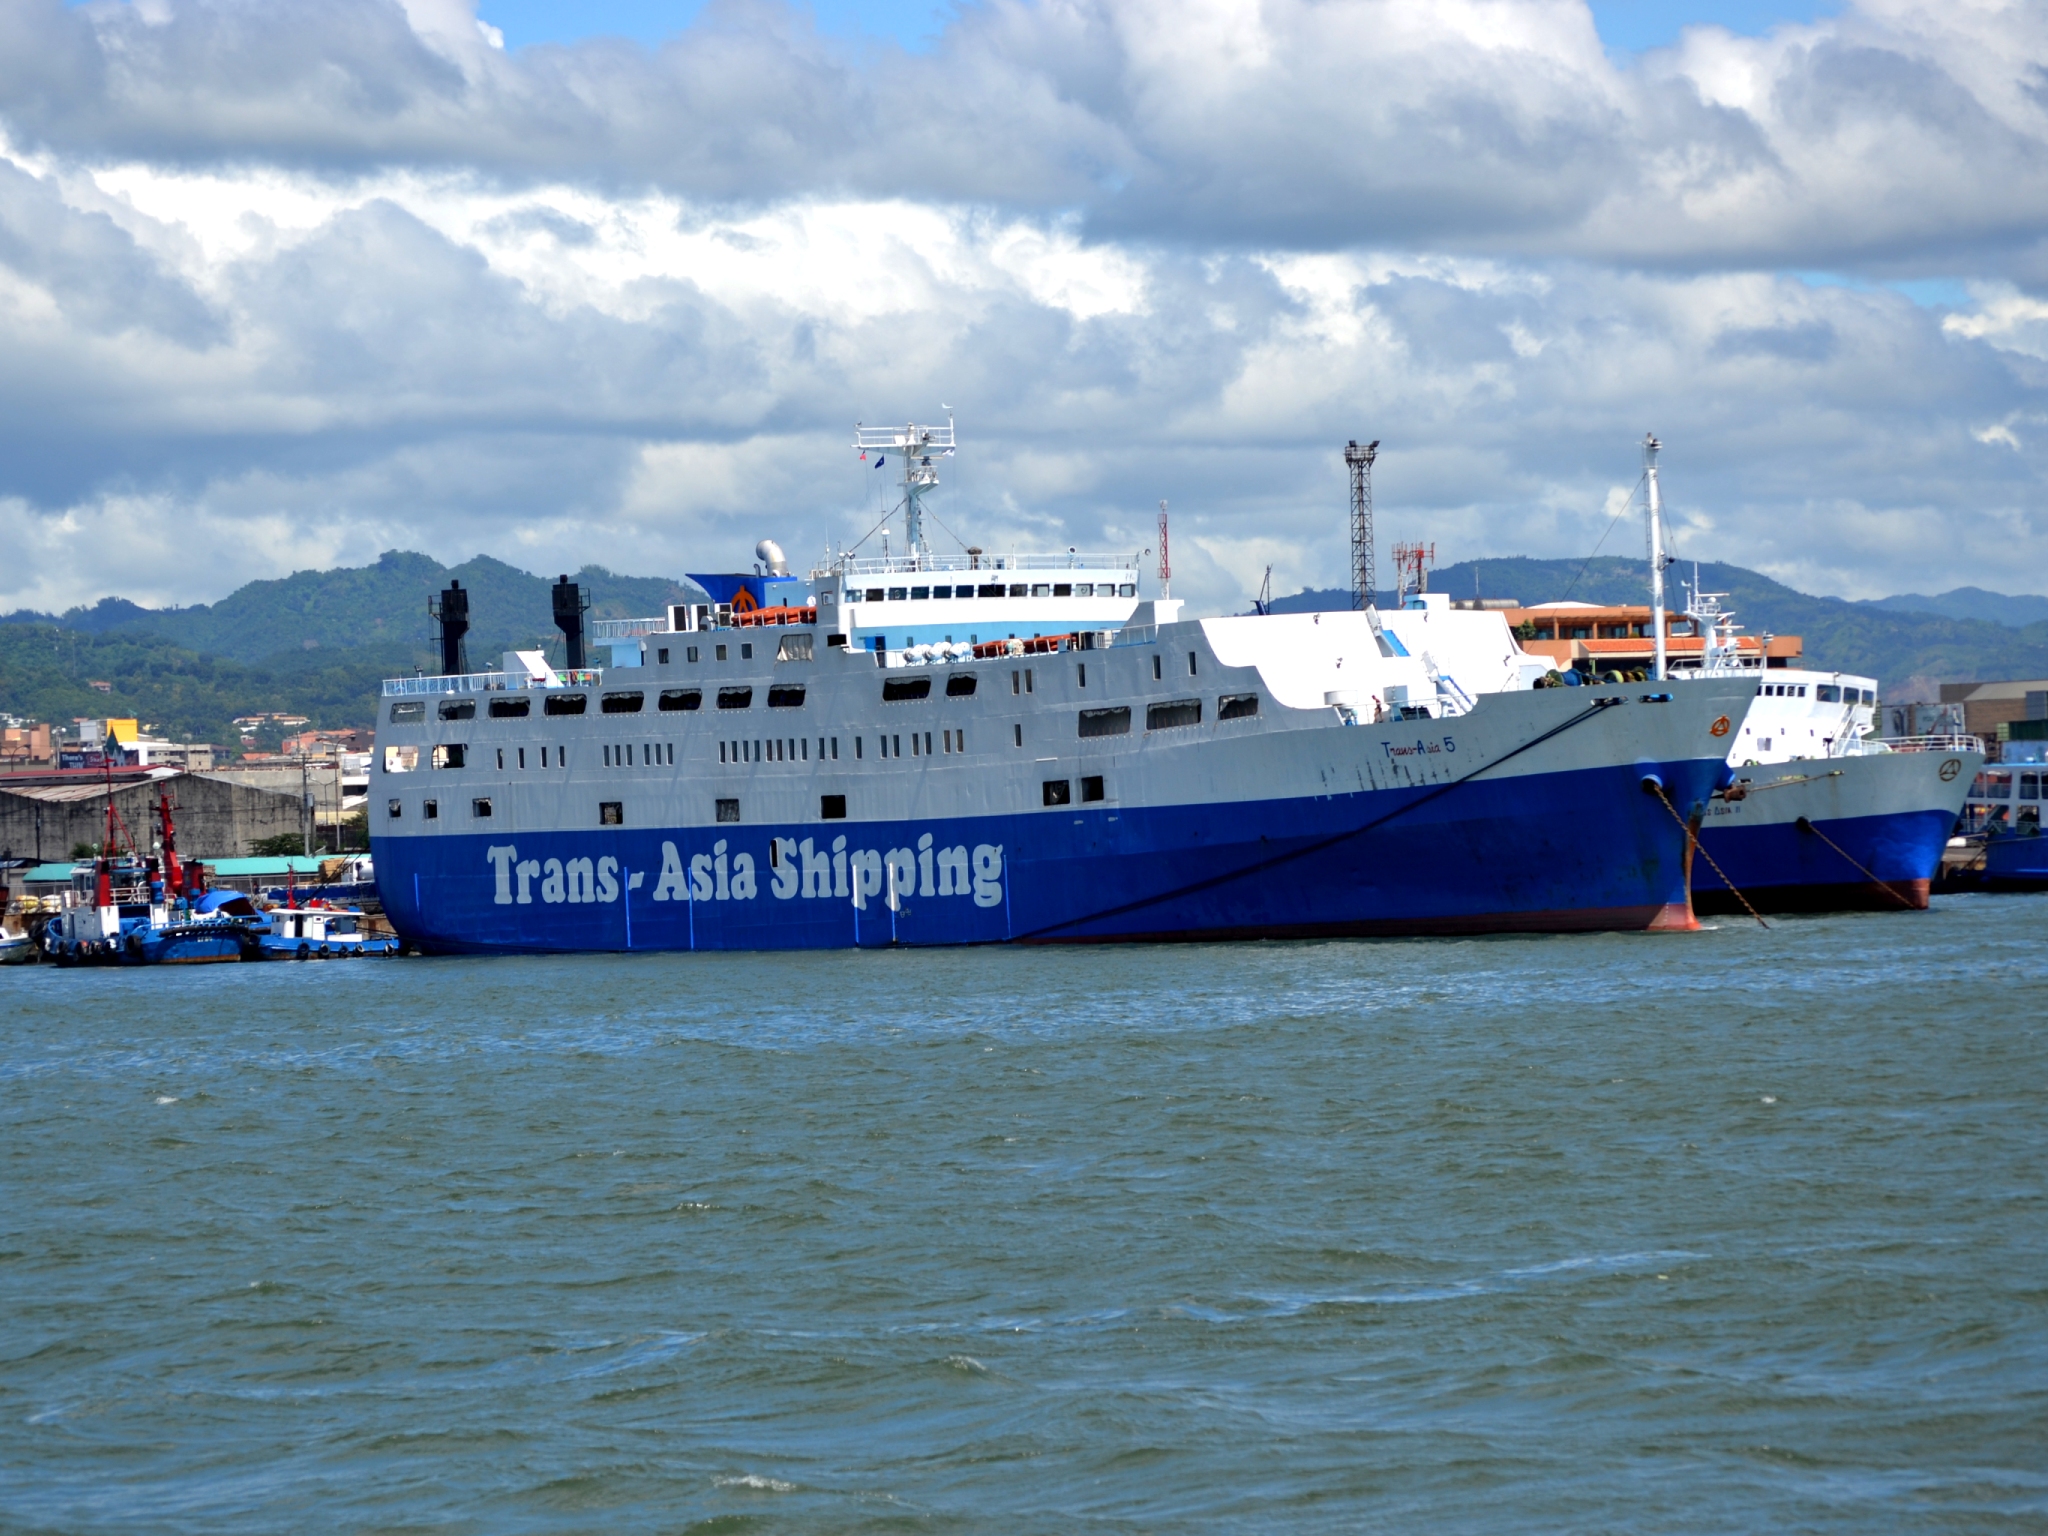 Trans-Asia Shipping Vessel Docked At The Cebu Port, Philippines, 43